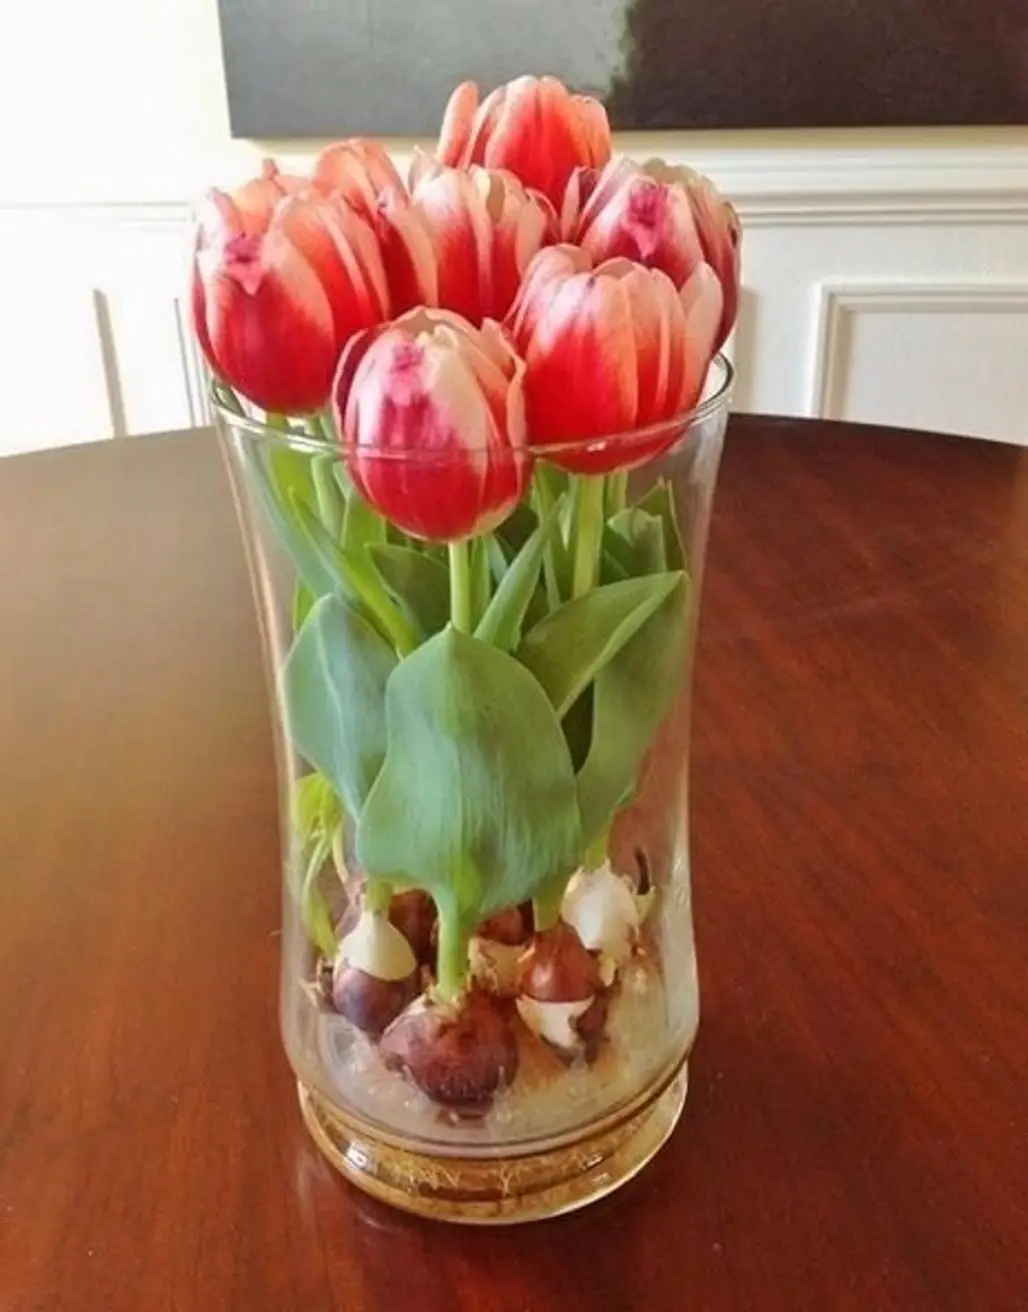 Perfect for when You Don't Have a Garden - Grow Tulips at Home